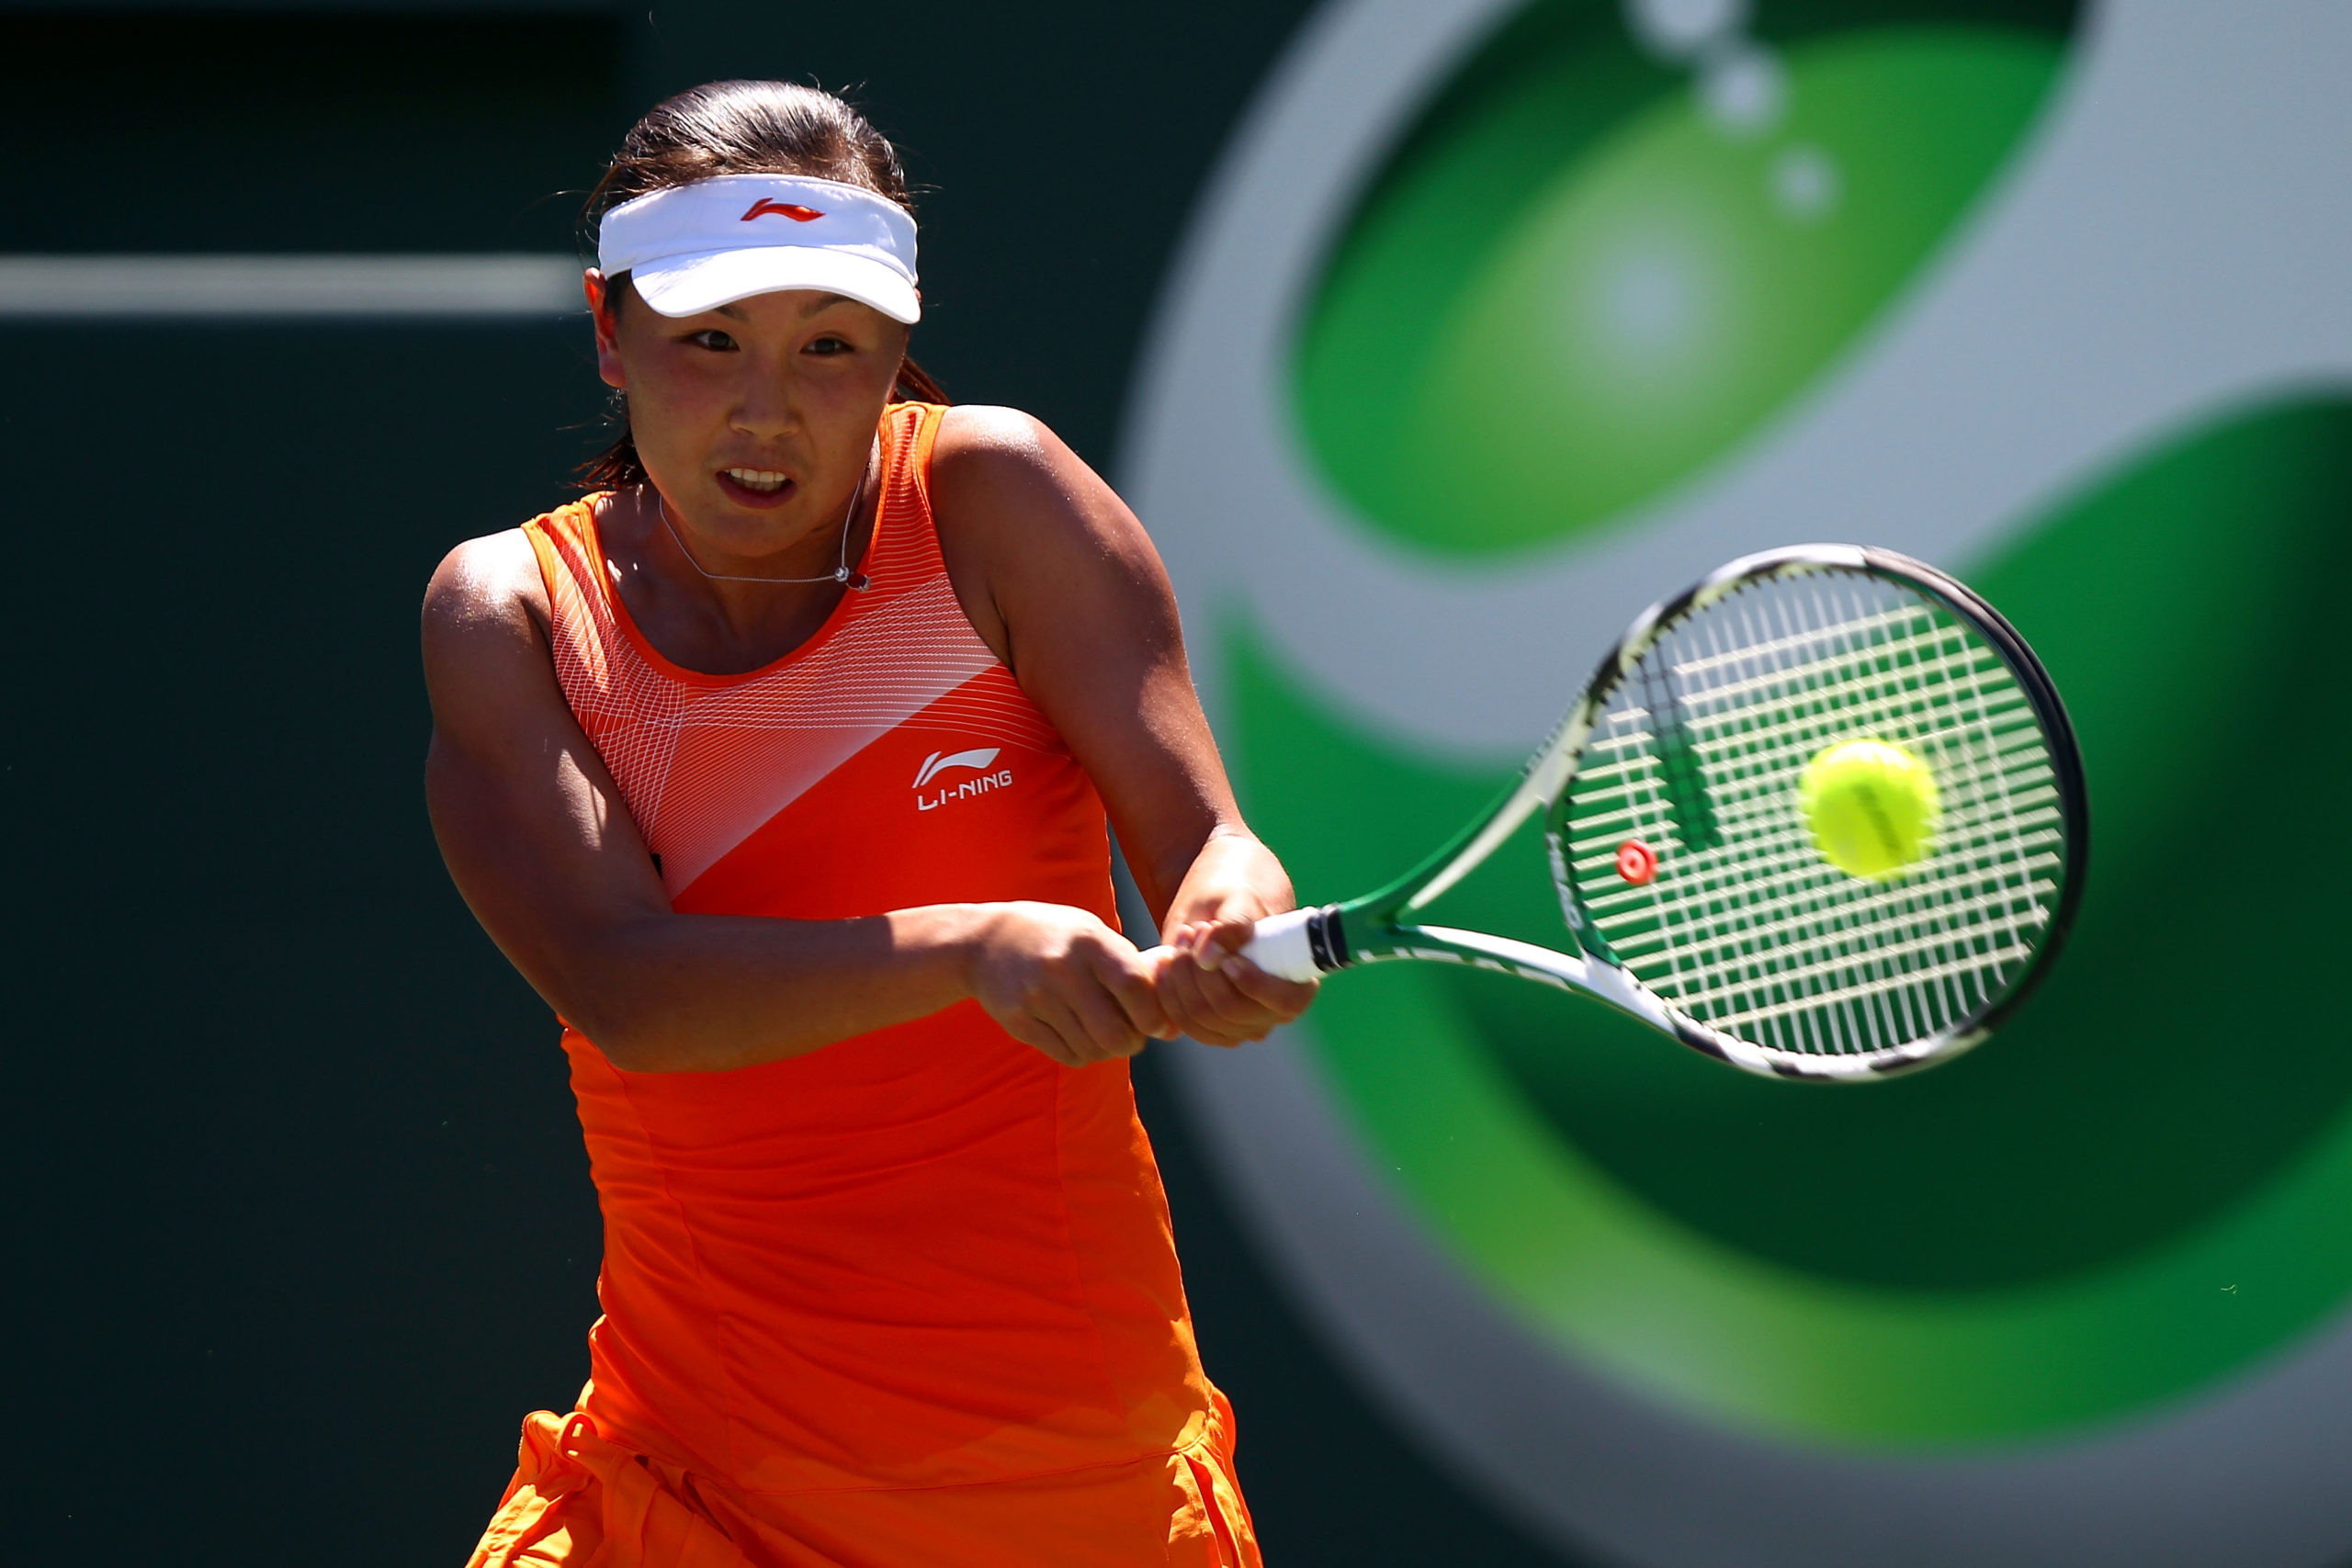 Peng Shuai of China hits a backhand return against Svetlana Kuznetsova of Russia during the Sony Ericsson Open at Crandon Park Tennis Center on March 26, 2011 in Key Biscayne, Florida. (Photo by Clive Brunskill/Getty Images)